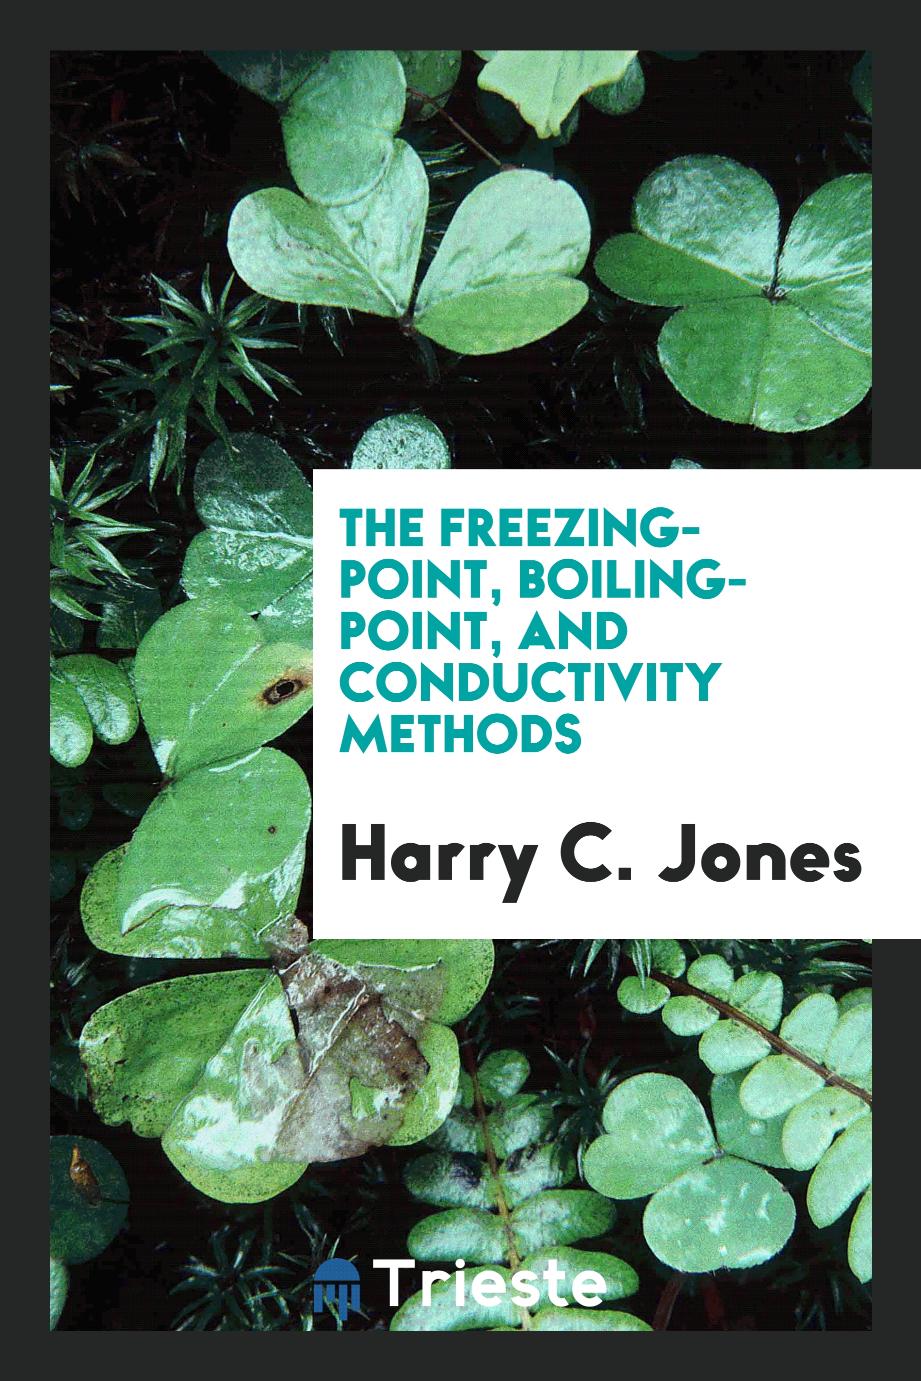 The Freezing-point, Boiling-point, and Conductivity Methods